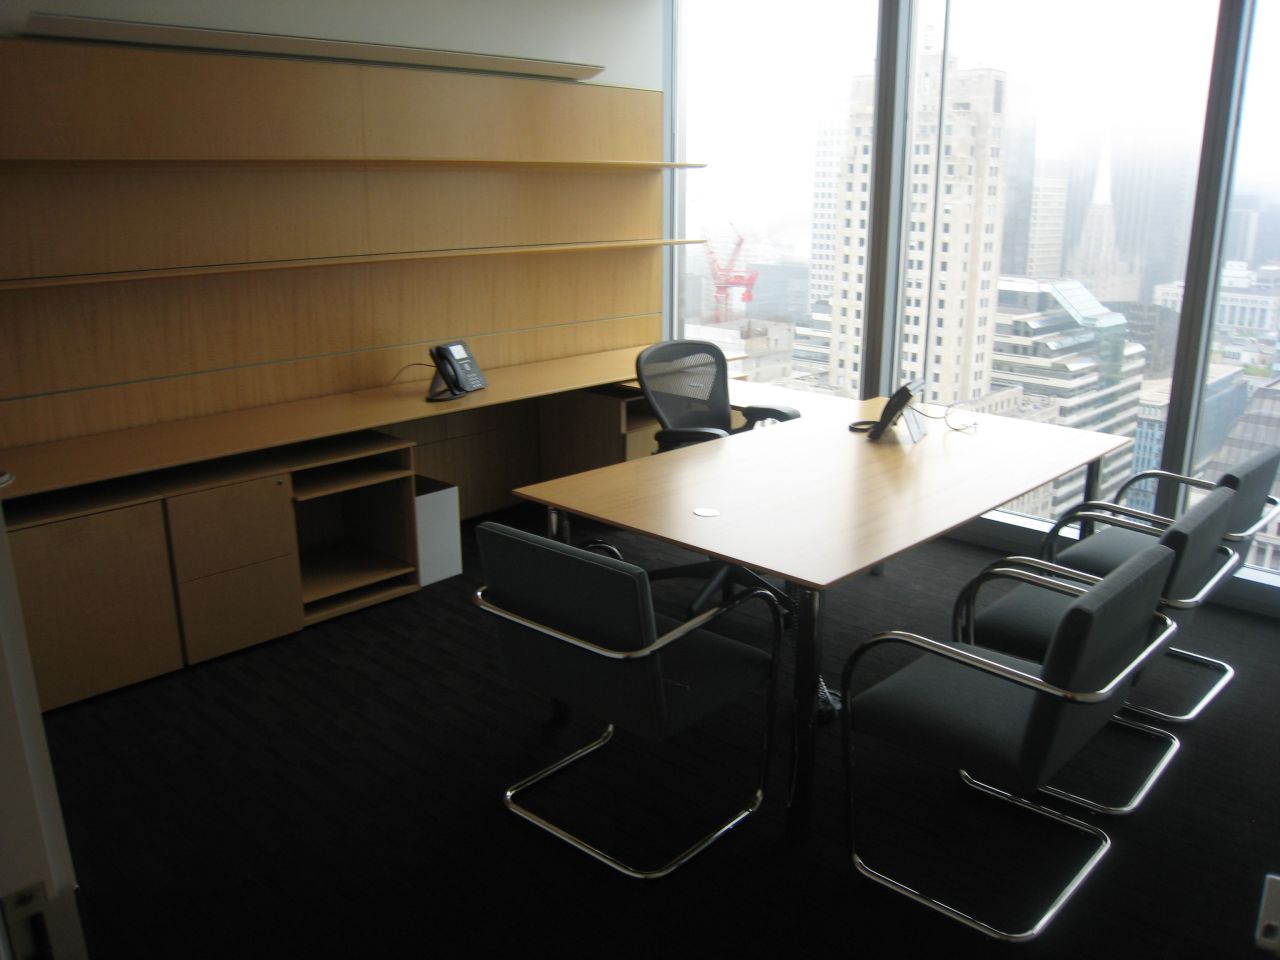 A typical partner's office on the 31st floor.